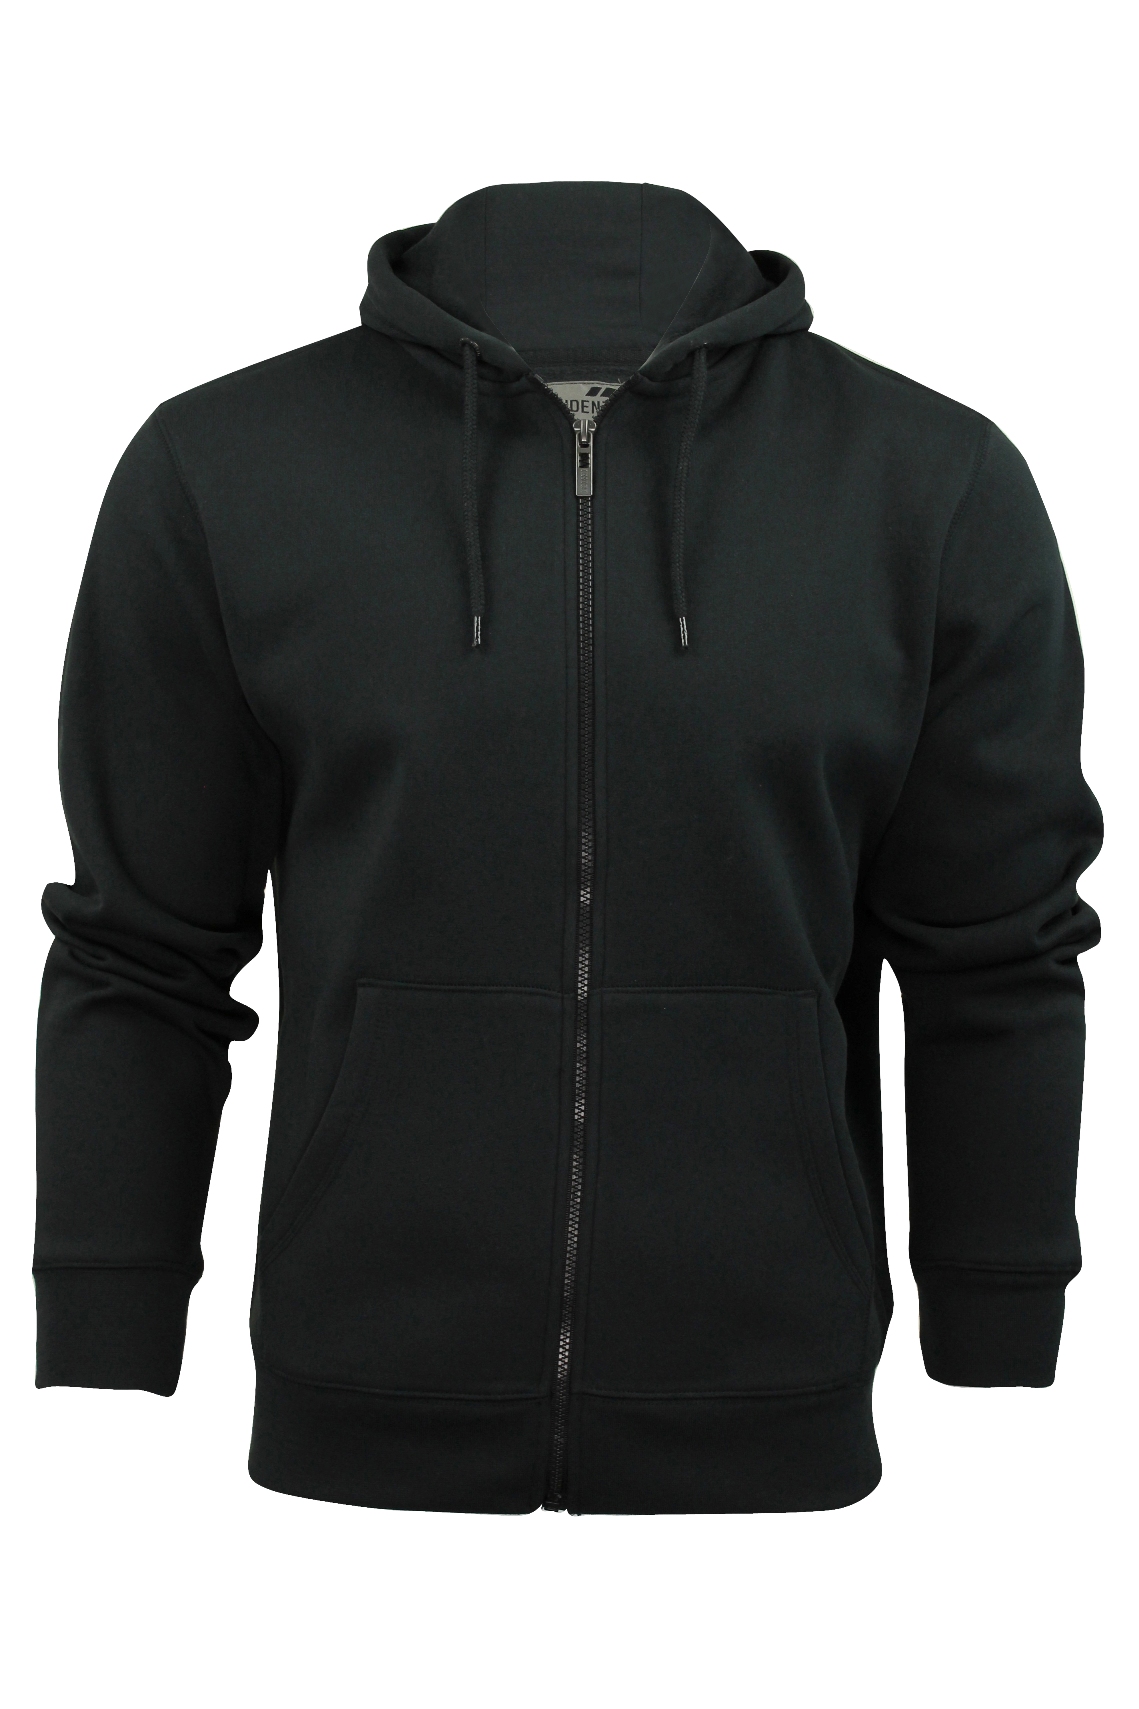 New Mens Dissident Minio Zip Up Fleeced Hoodie Hooded Sweater Size M ...